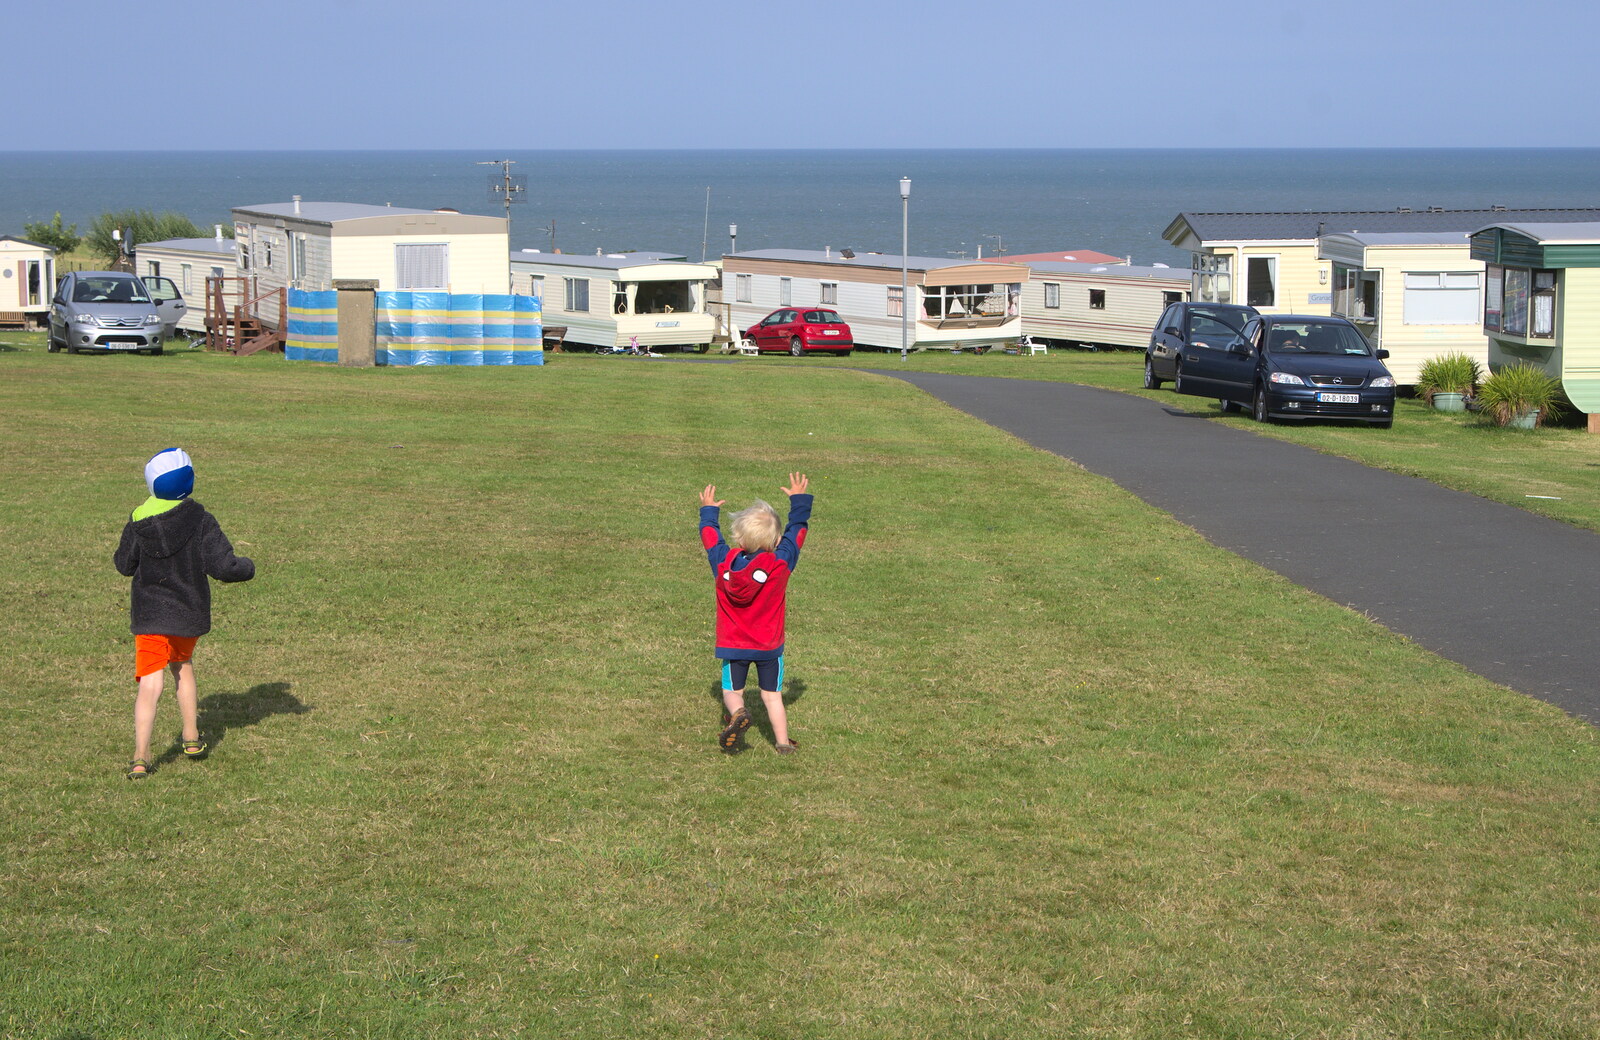 Harry roams around with his arms in the air from Camping at Silver Strand, Wicklow, County Wicklow, Ireland - 7th August 2014